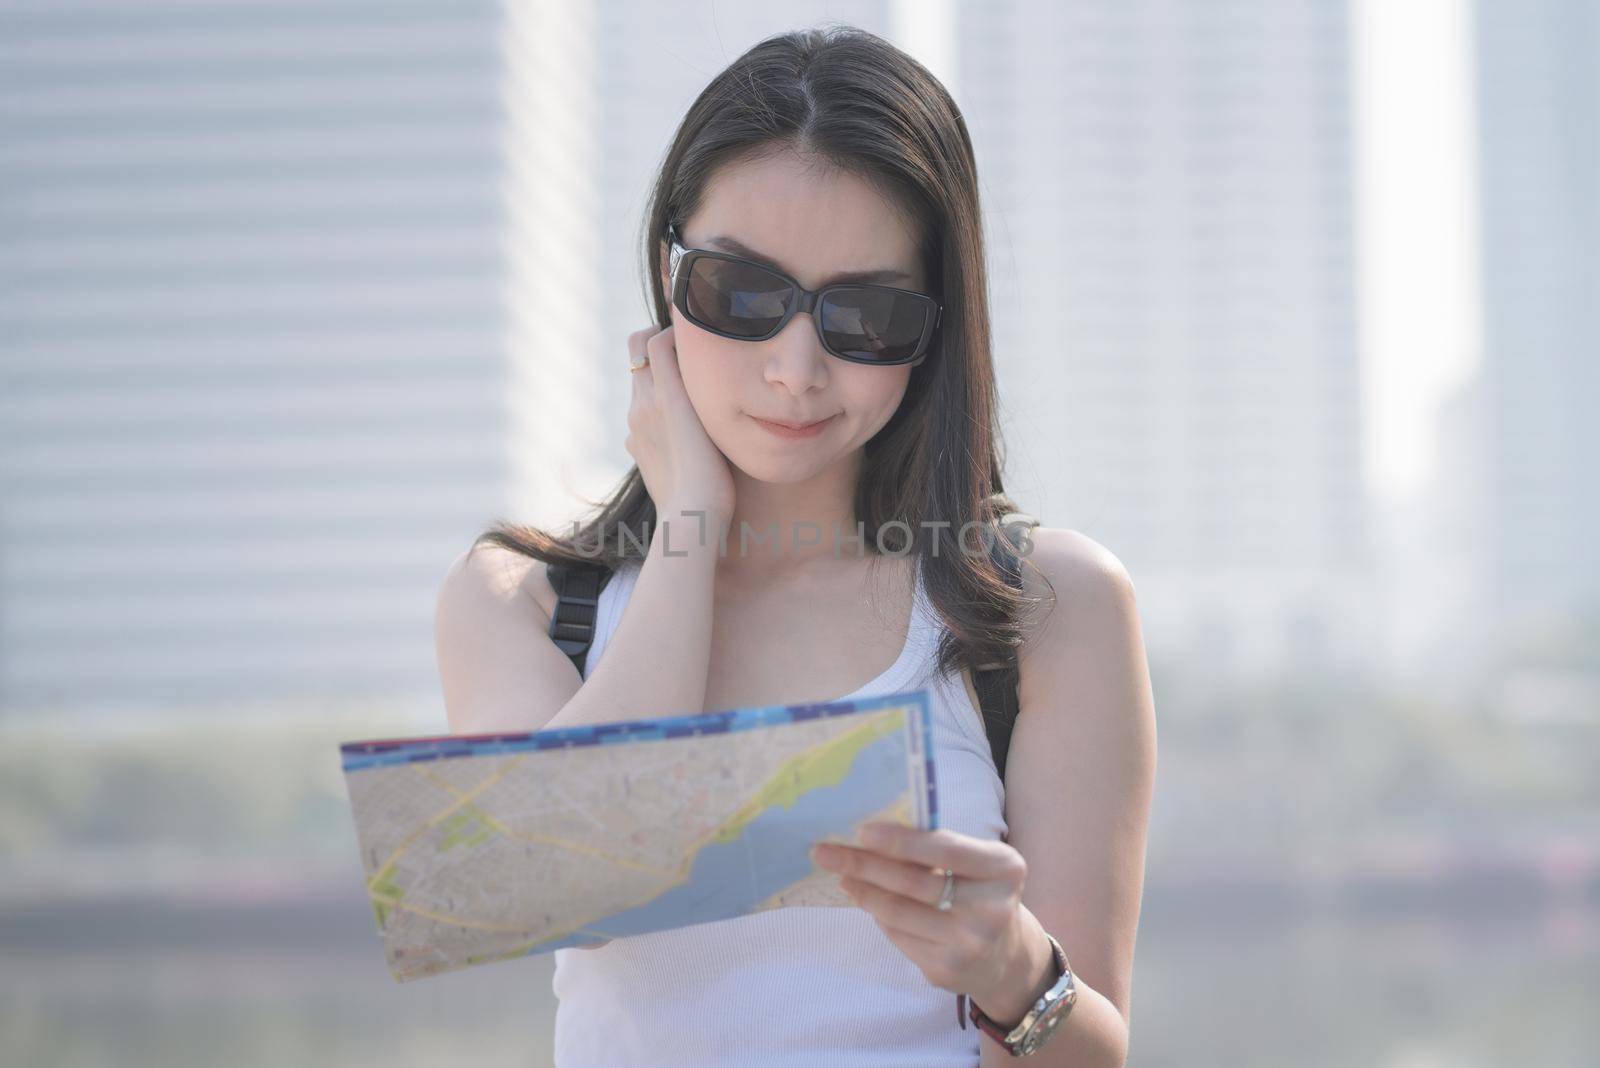 Beautiful asian tourist looking at the map searching for tourists sightseeing spot. Vacation travel in summer.